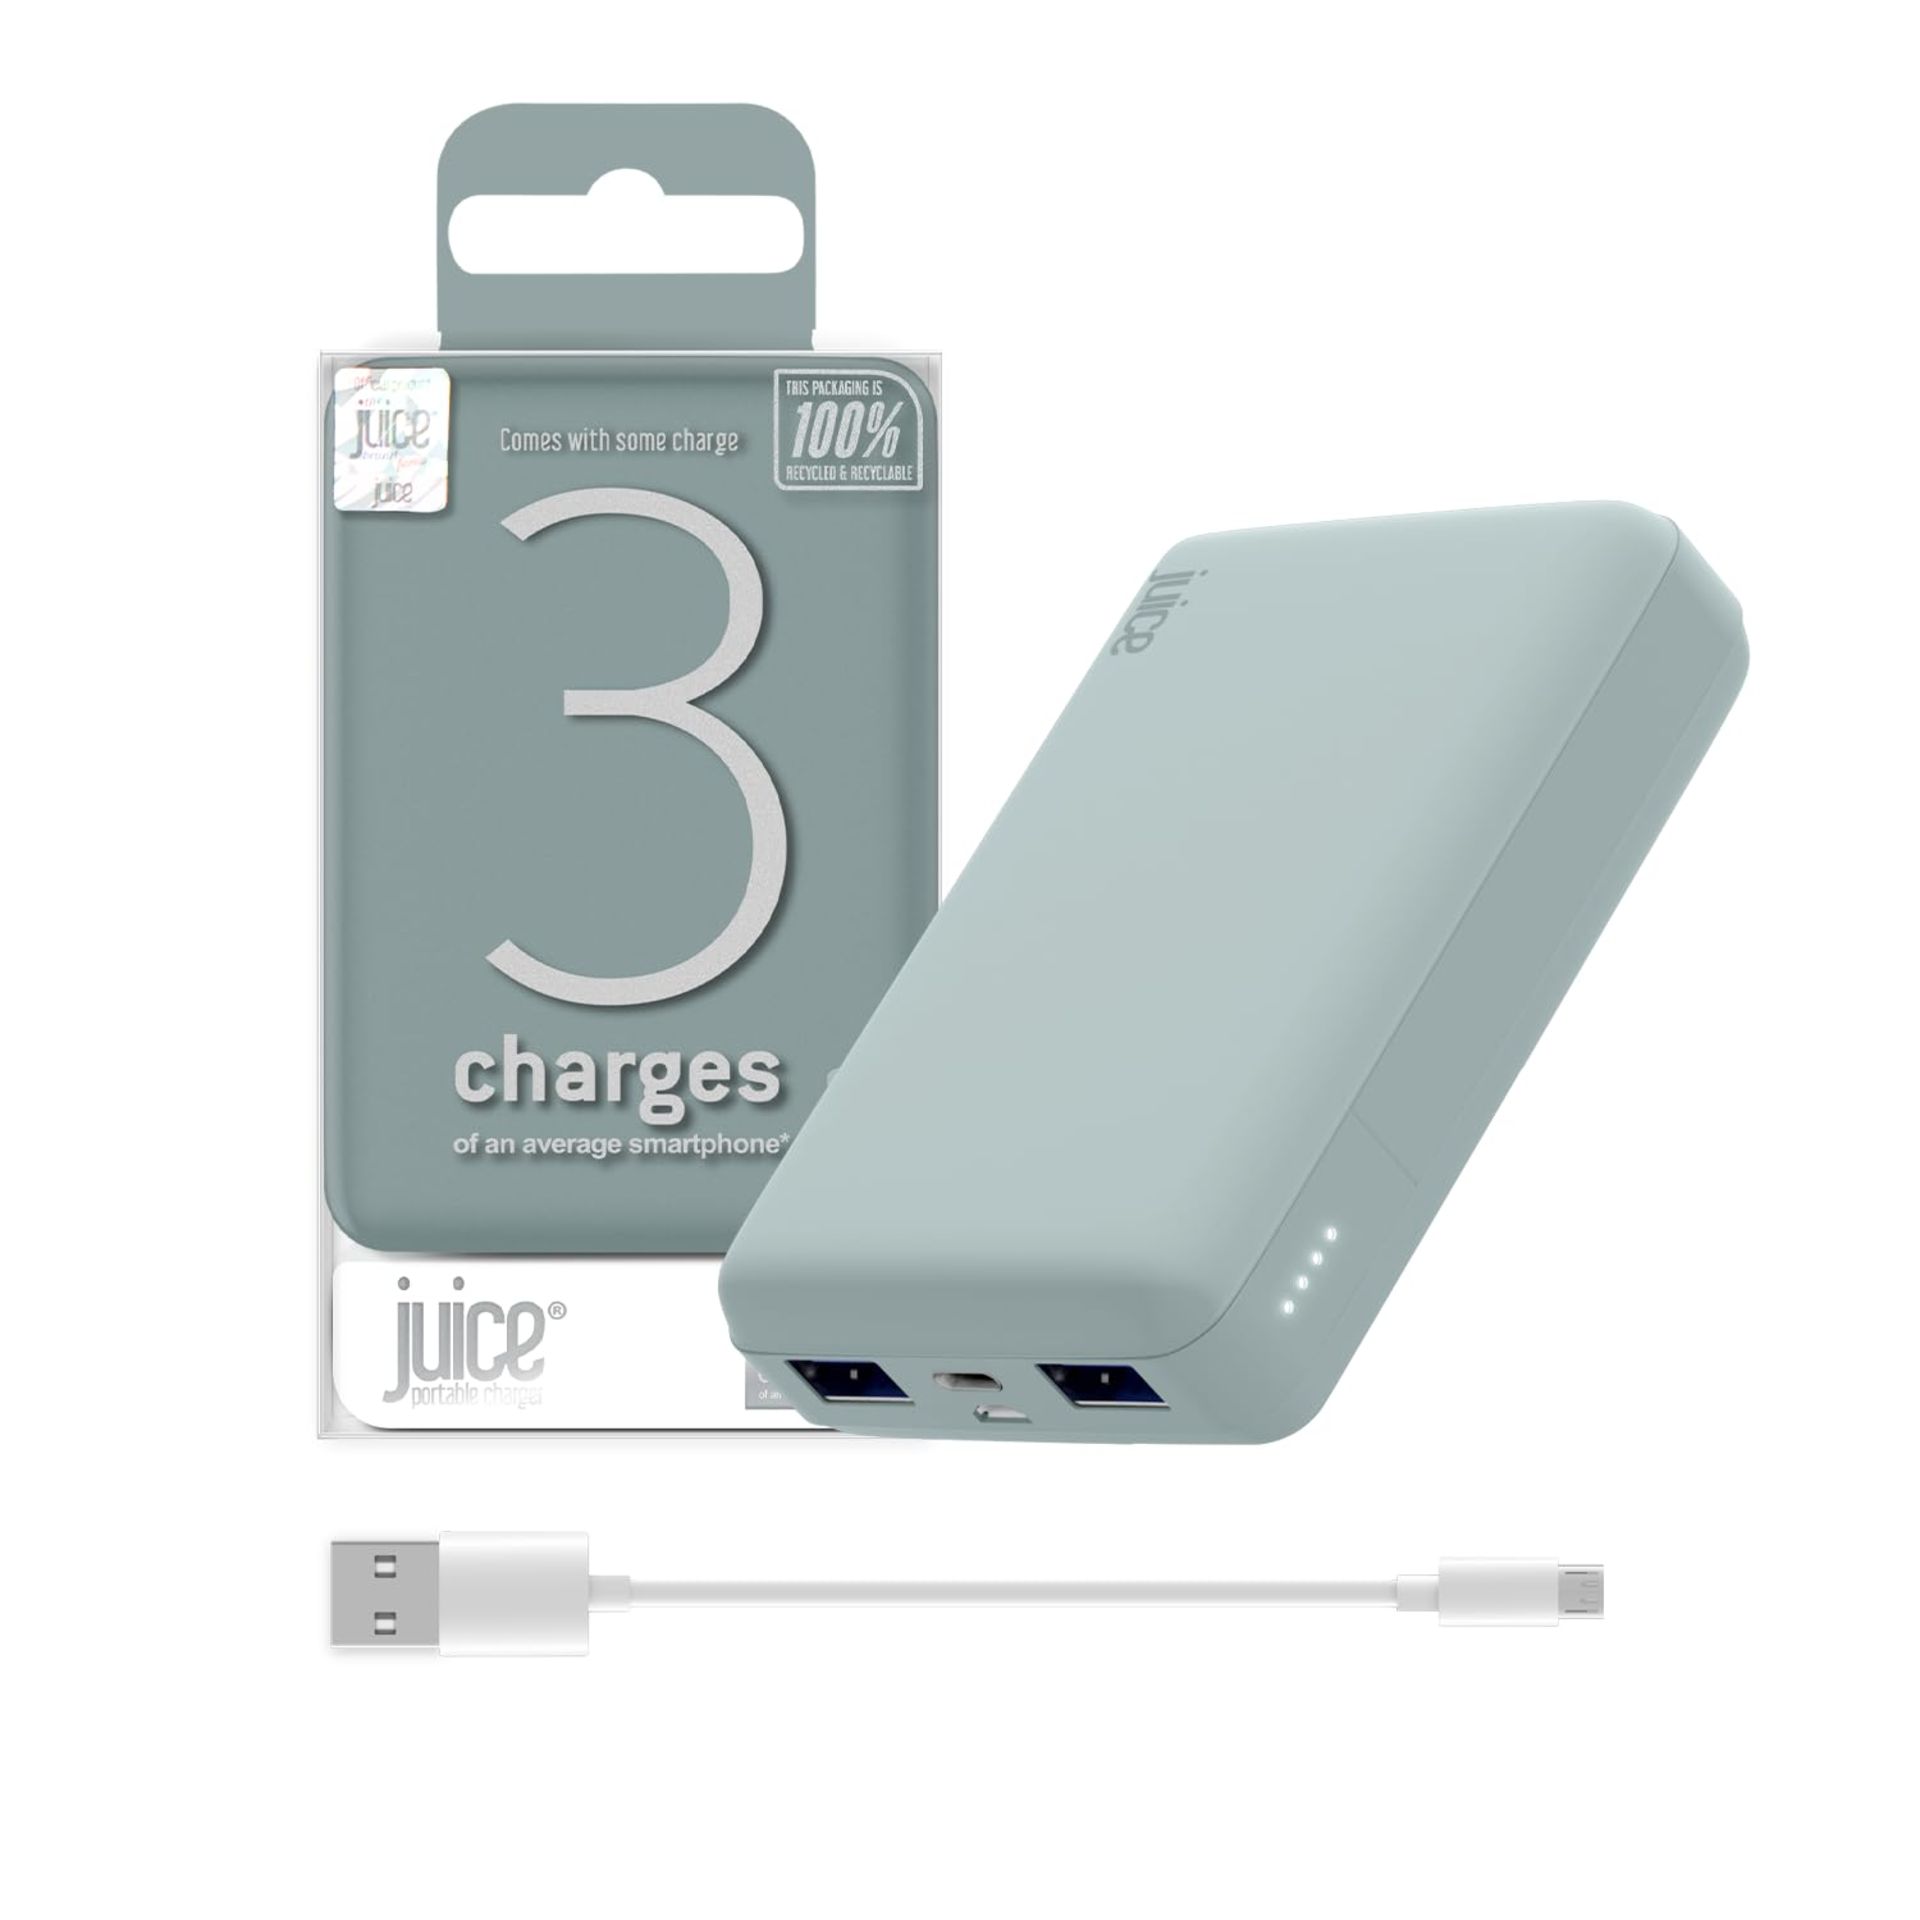 RRP £23.98 Juice 3 Charges Power Bank Portable Charger for Apple iPhone